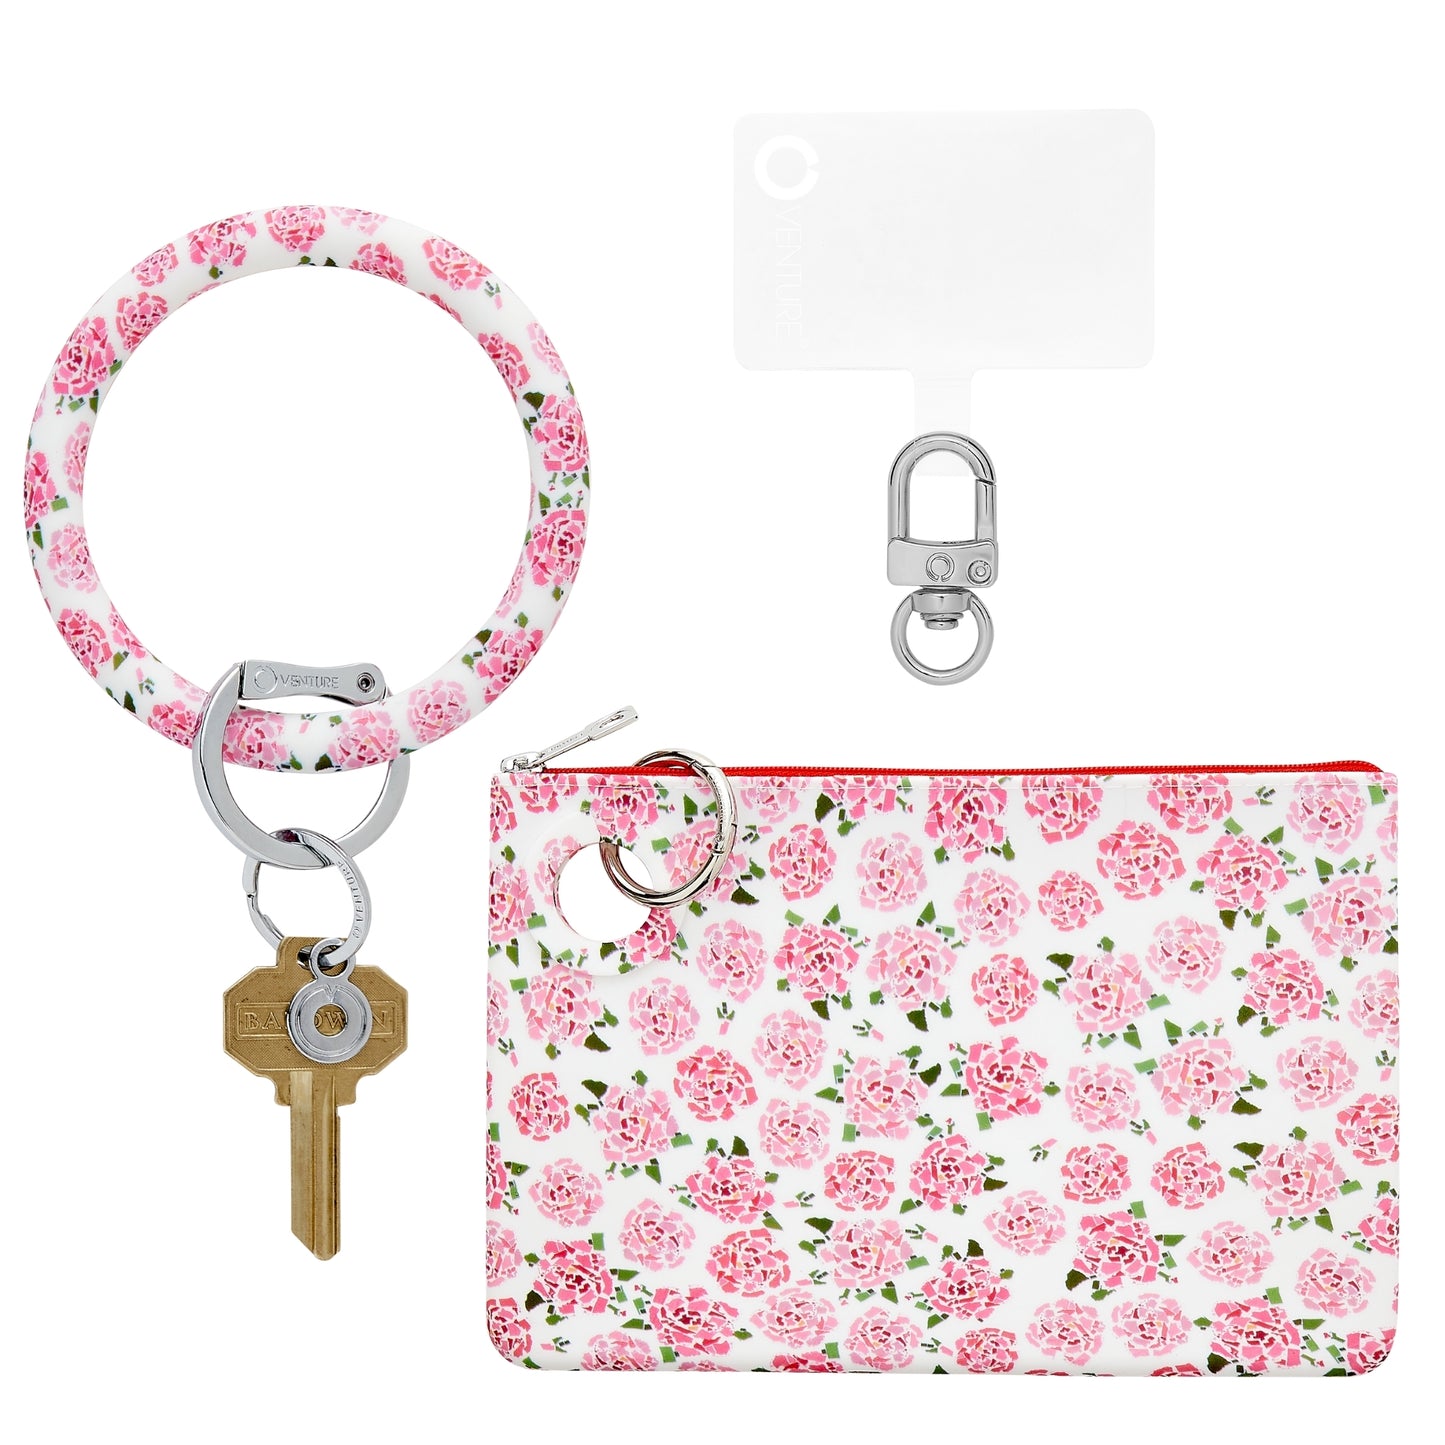 Stylish Large Pouch Wristlet with Phone Holder in pink peony floral print.